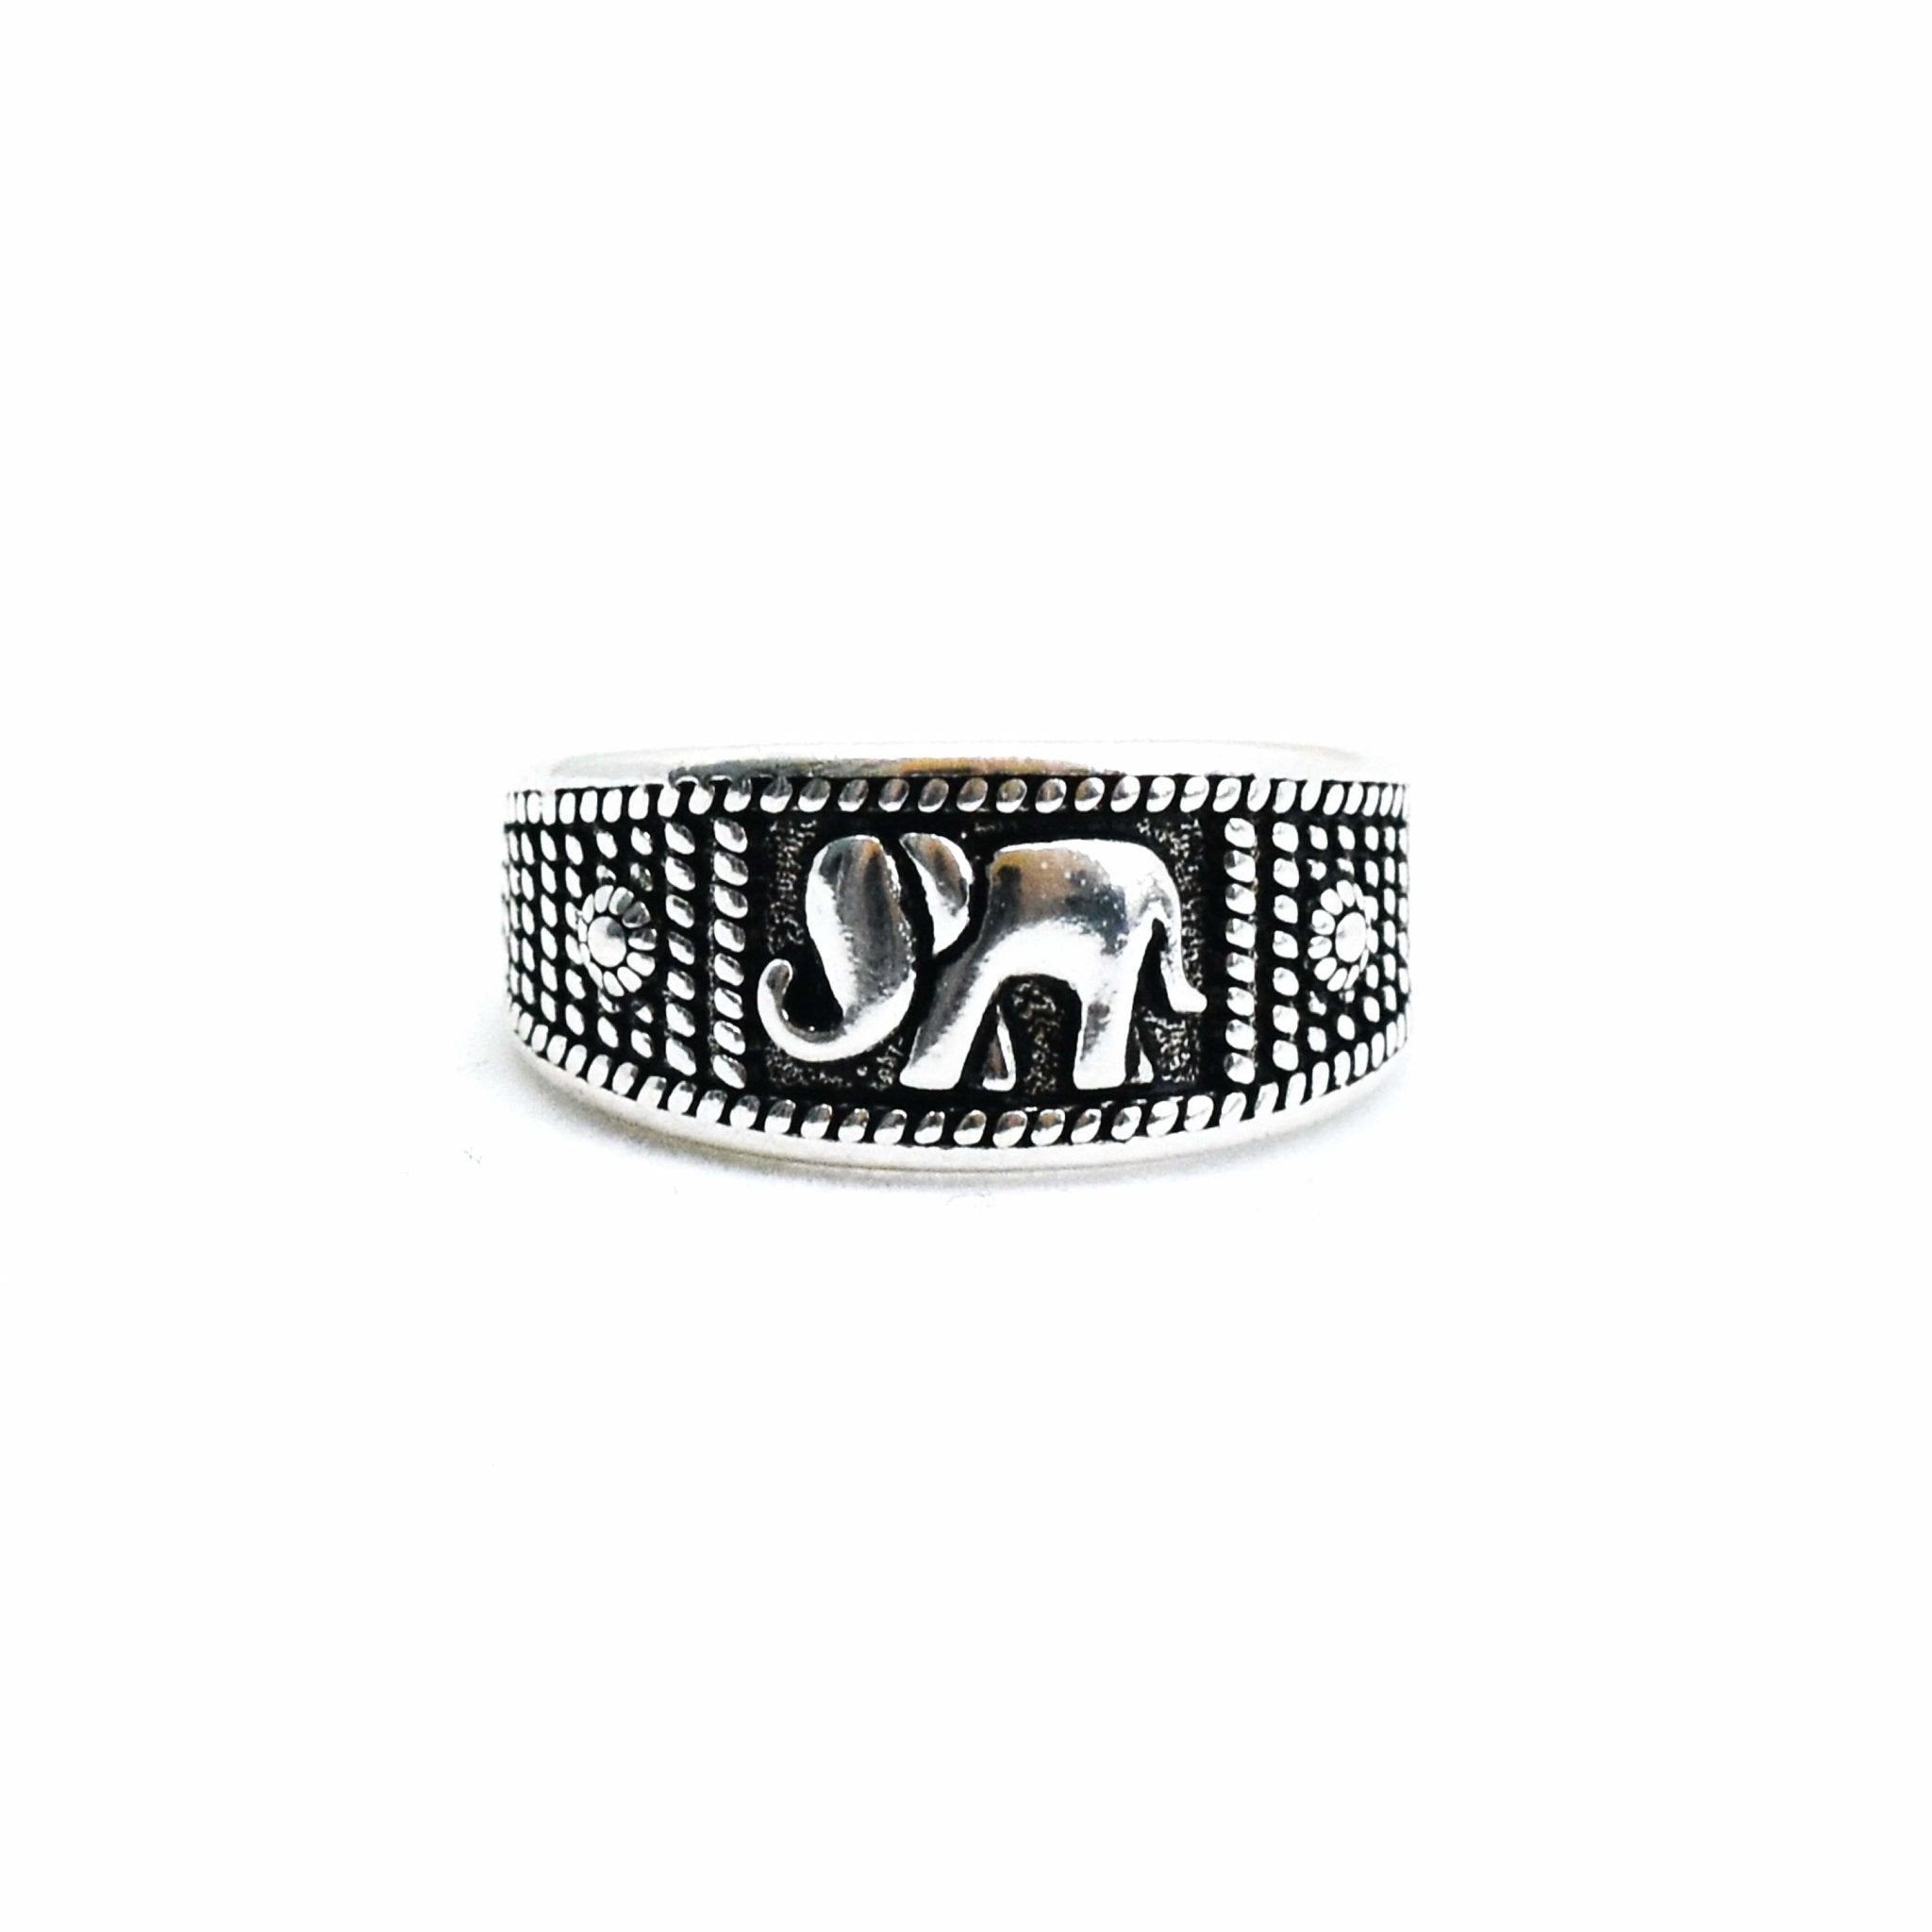 KRABI ELEPHANT RING Elepanta Rings - Buy Today Elephant Pants Jewelry And Bohemian Clothes Handmade In Thailand Help To Save The Elephants FairTrade And Vegan